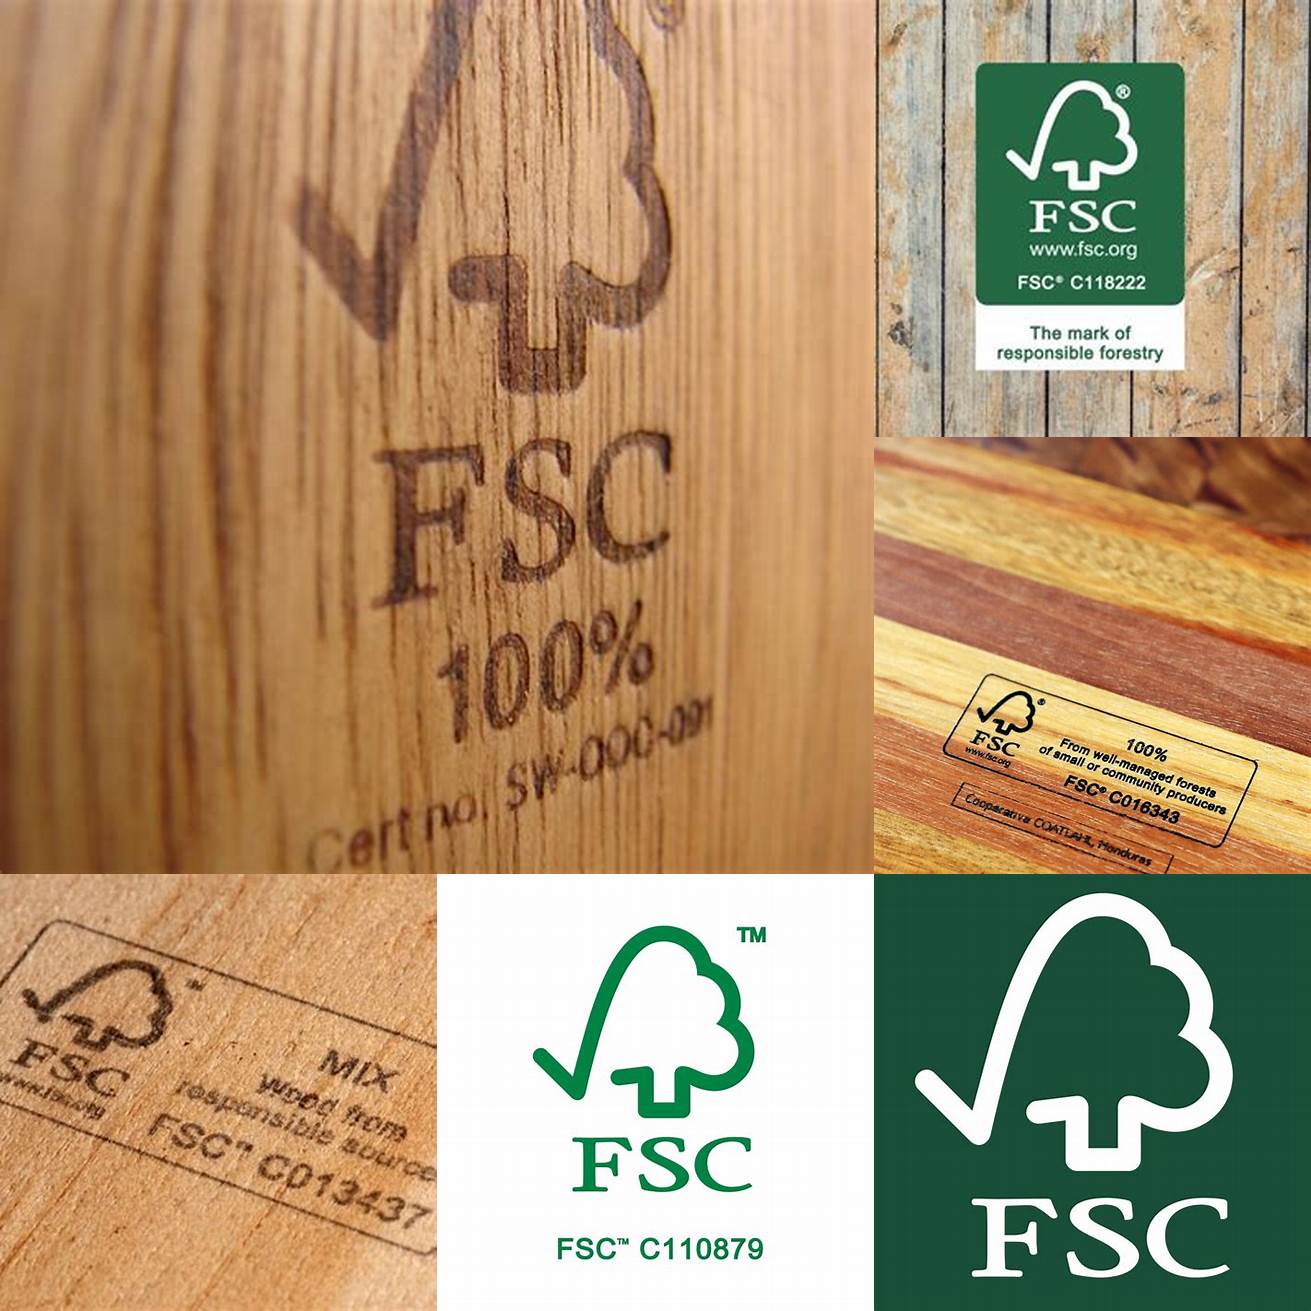 A close-up of the FSC certification logo